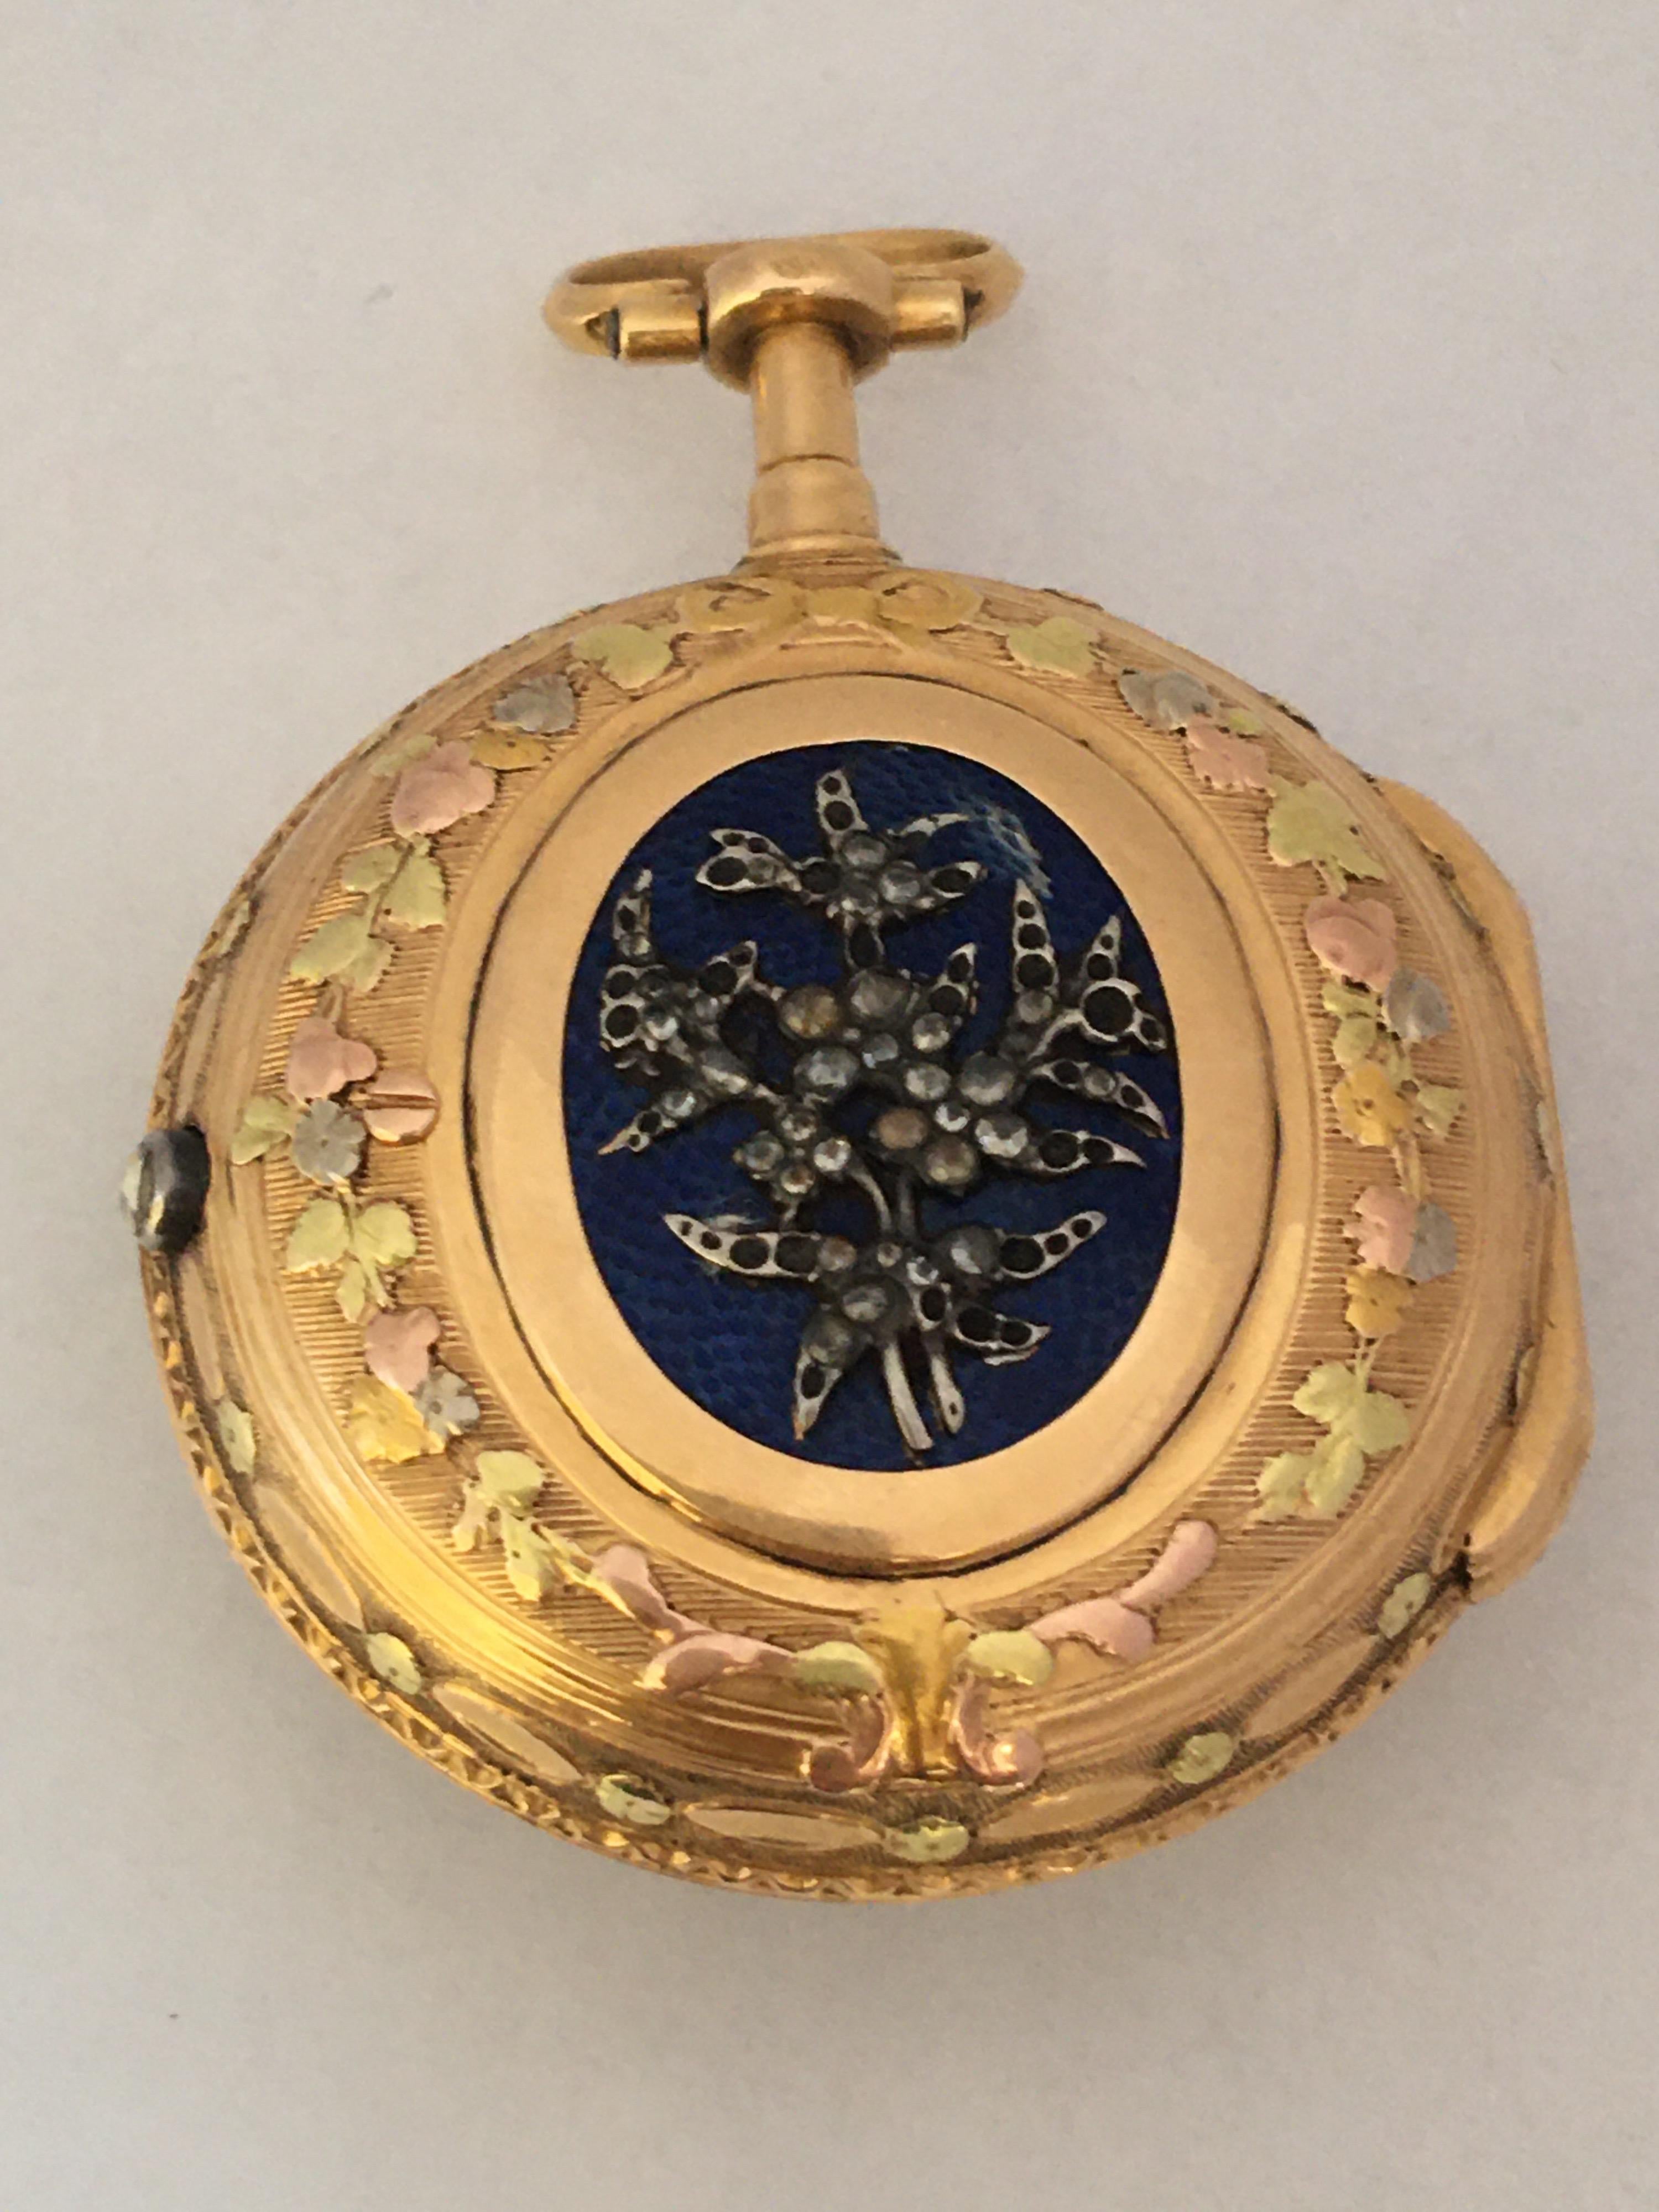 This beautiful handmade fusee movement 18-karat tri-color gold blue enamel verge pocket watch is in good working condition and it is ticking well, Visible signs of ageing and wear with light surface marks on the glass. some chip on the enamel dial